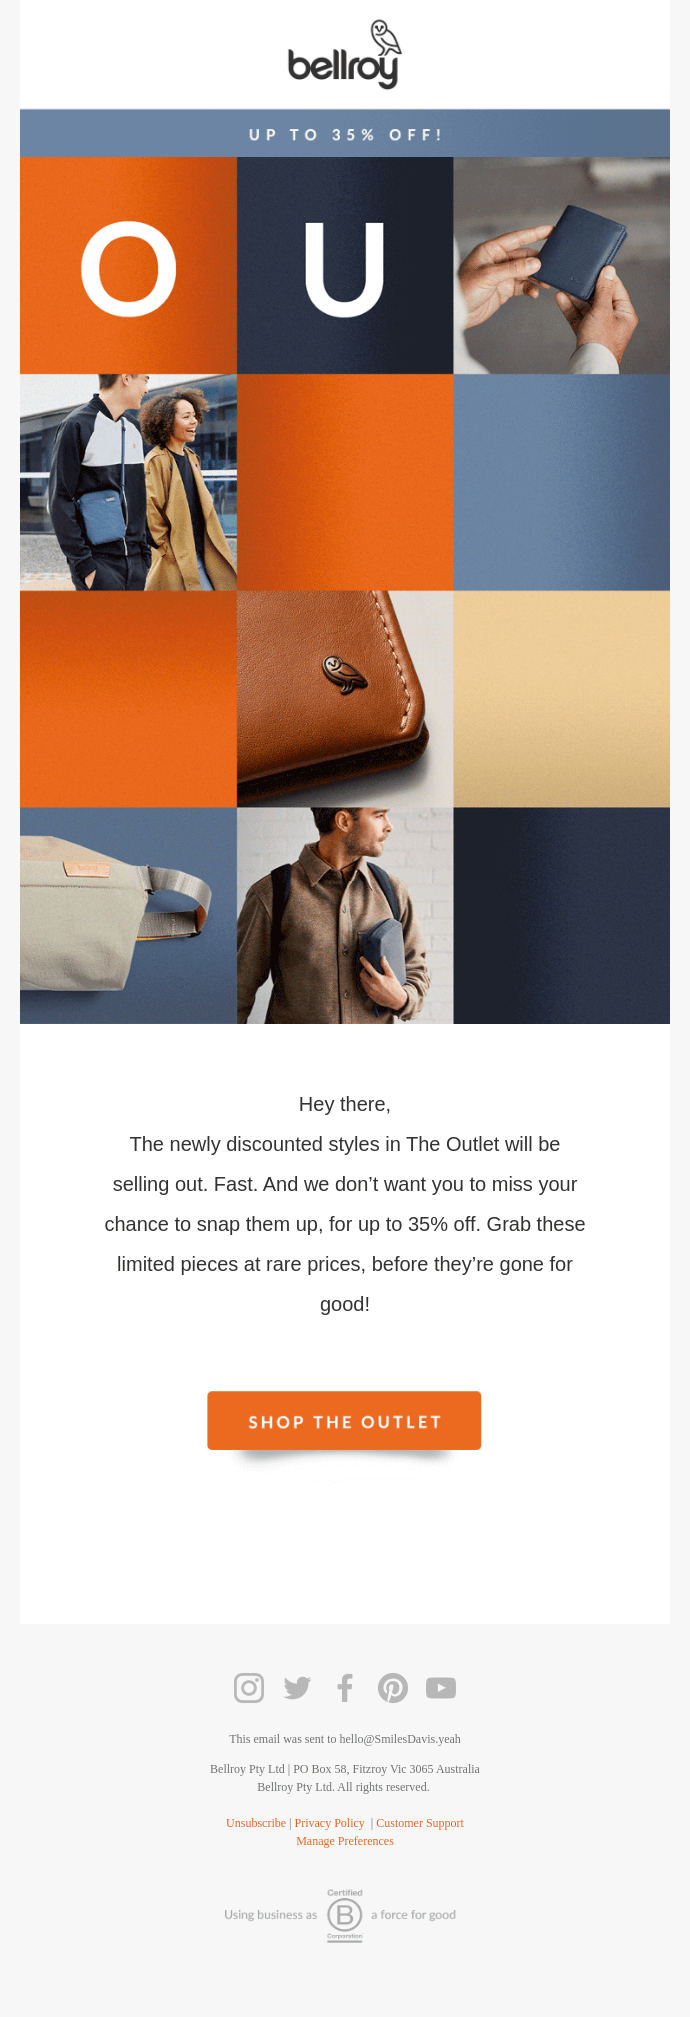 Exclusive first access. - Bellroy Email Newsletter